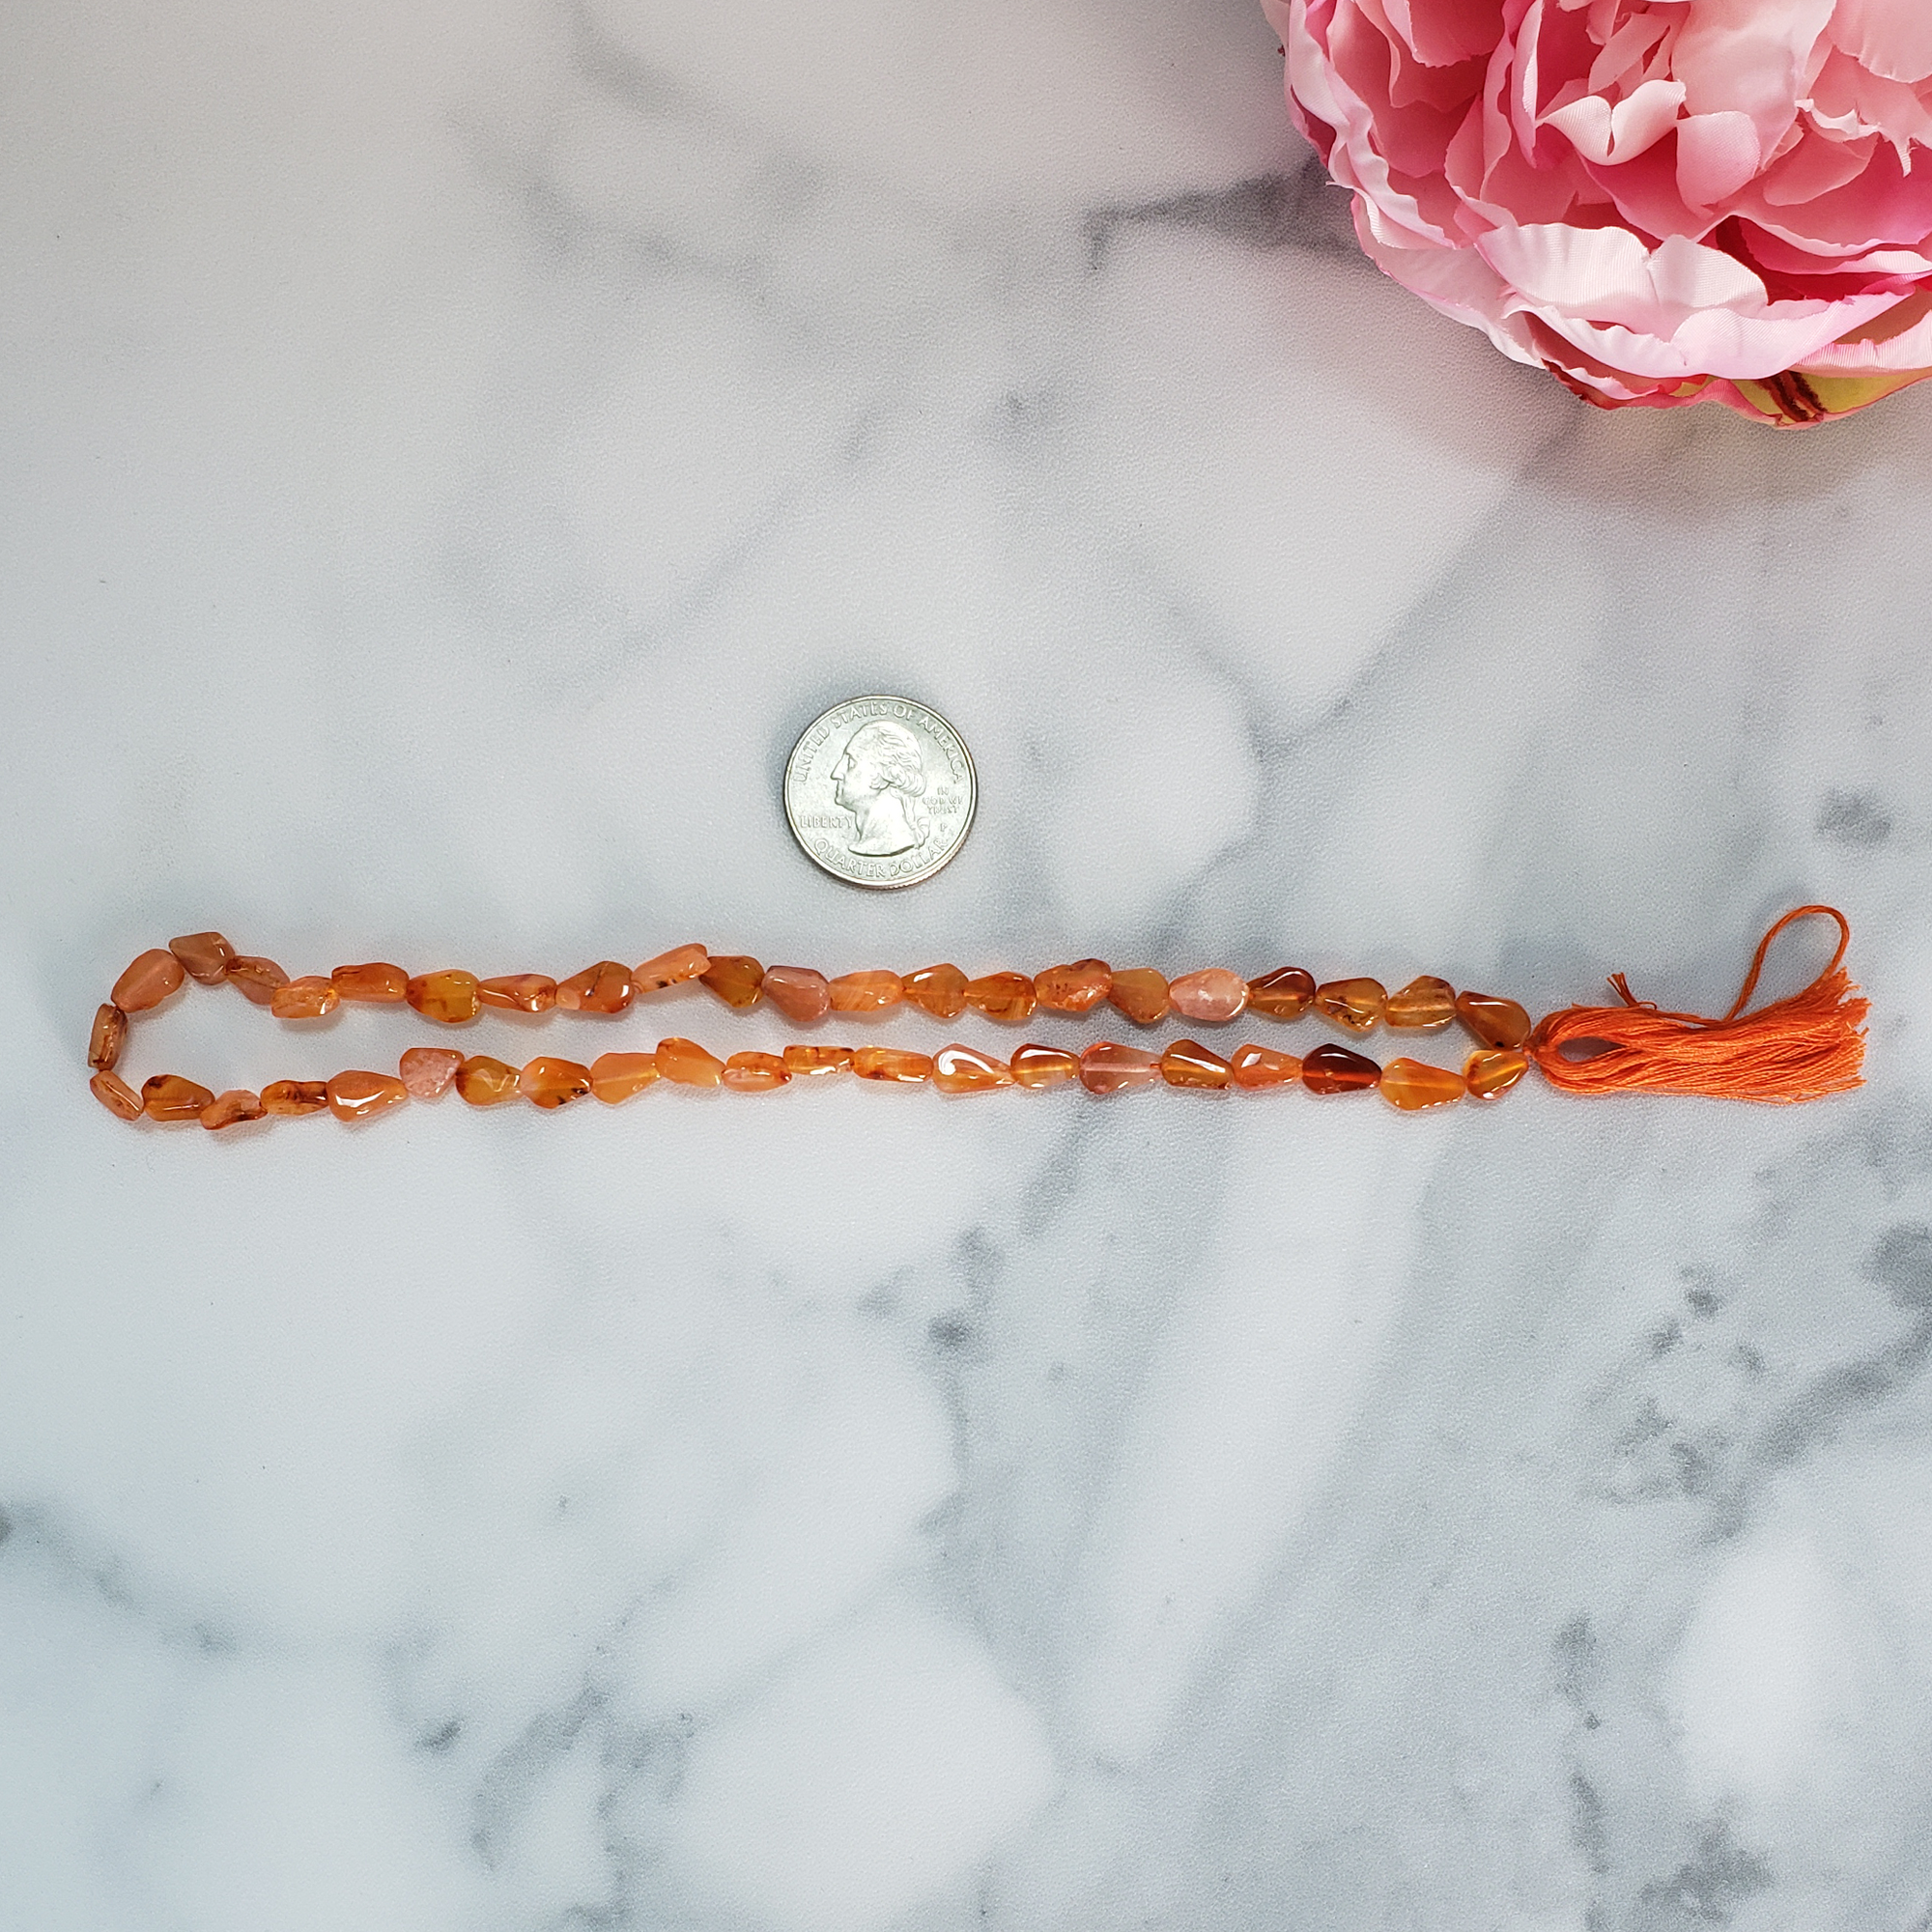 Carnelian Natural Crystal Beads Strand | One Strand of Carnelian Chip Beads - Size Comparison